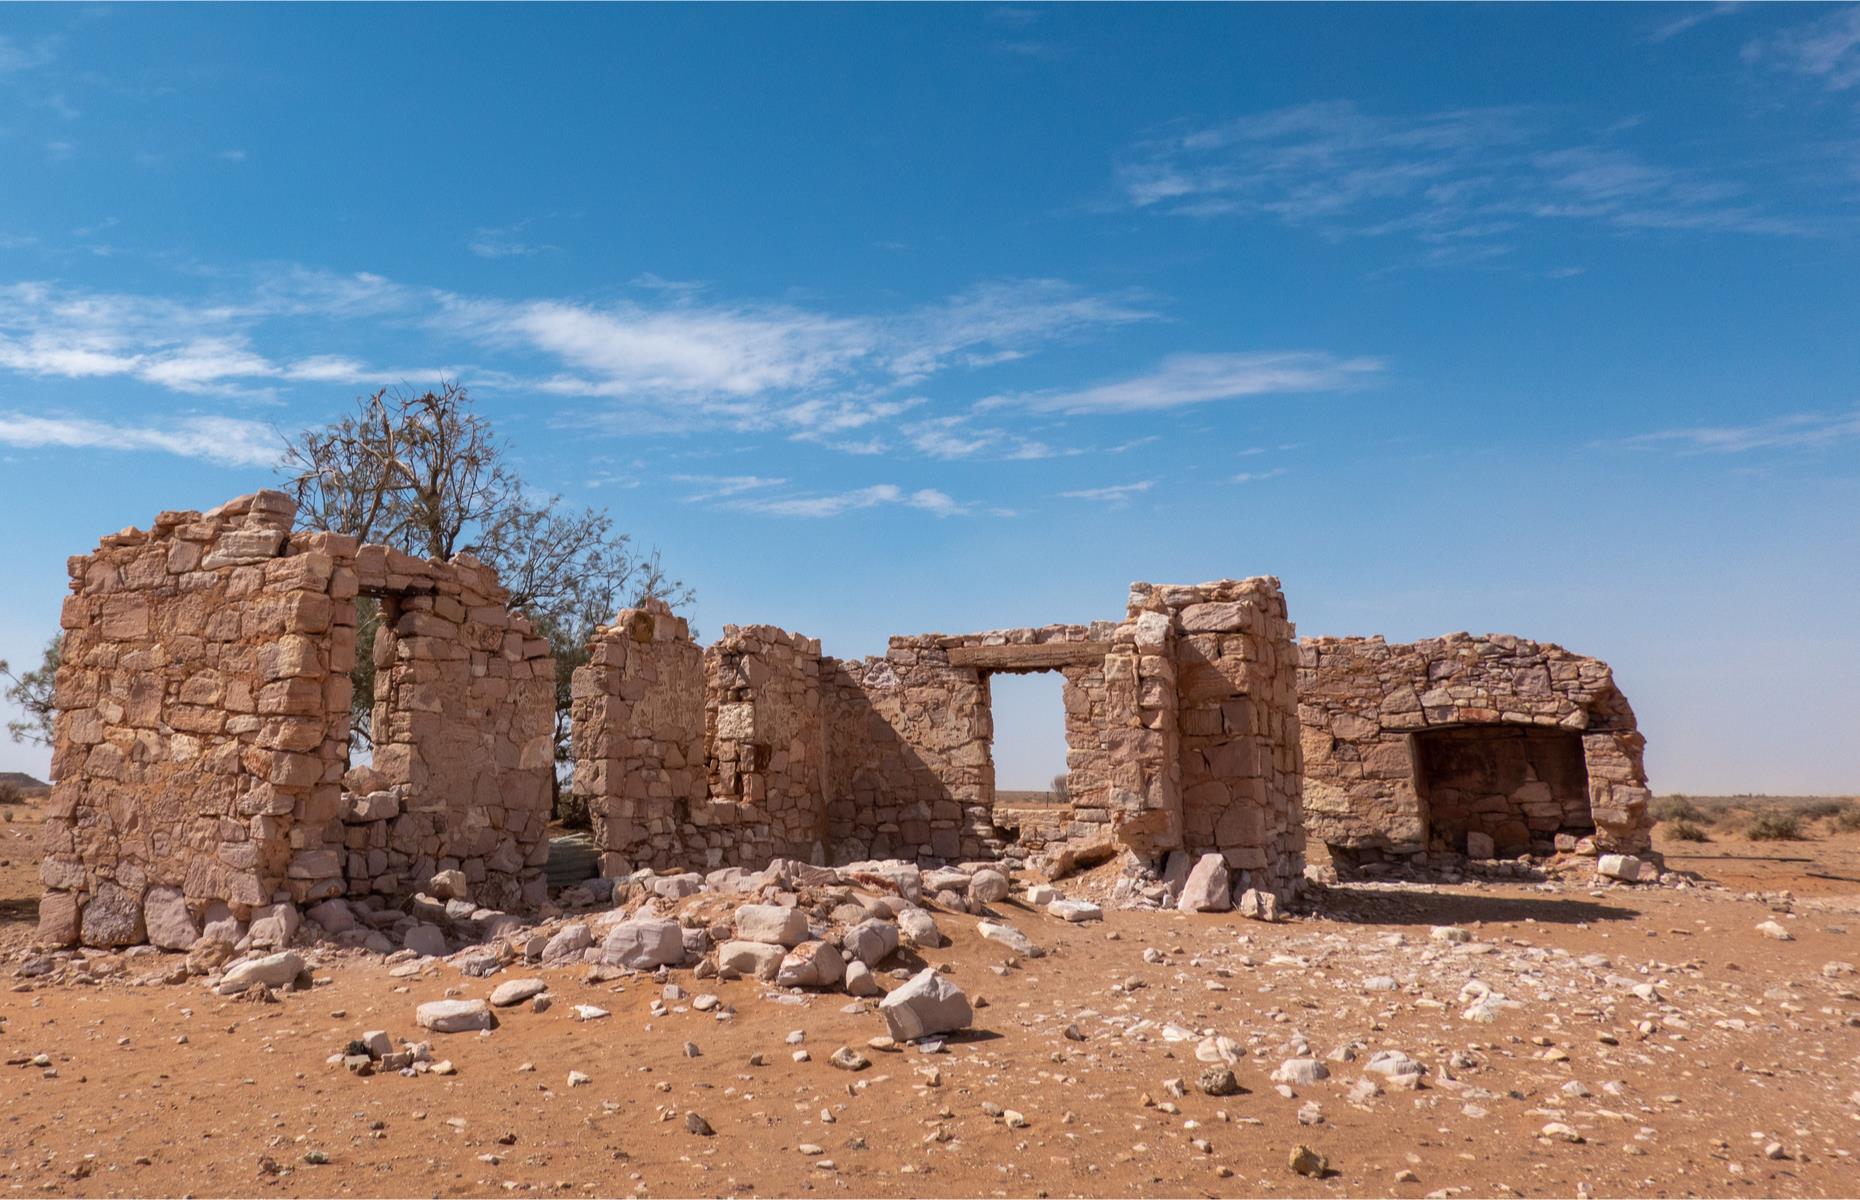 The old stock route that was established between Marree in South Australia and Birdsville in Queensland in the 1880s is scattered with poignant ruins that recall a distant past. These include the sun-baked remnants of the old Lake Harry Homestead, just to the north of Marree. It was a date palm plantation and camel trading station that failed to prosper in the harsh terrain.